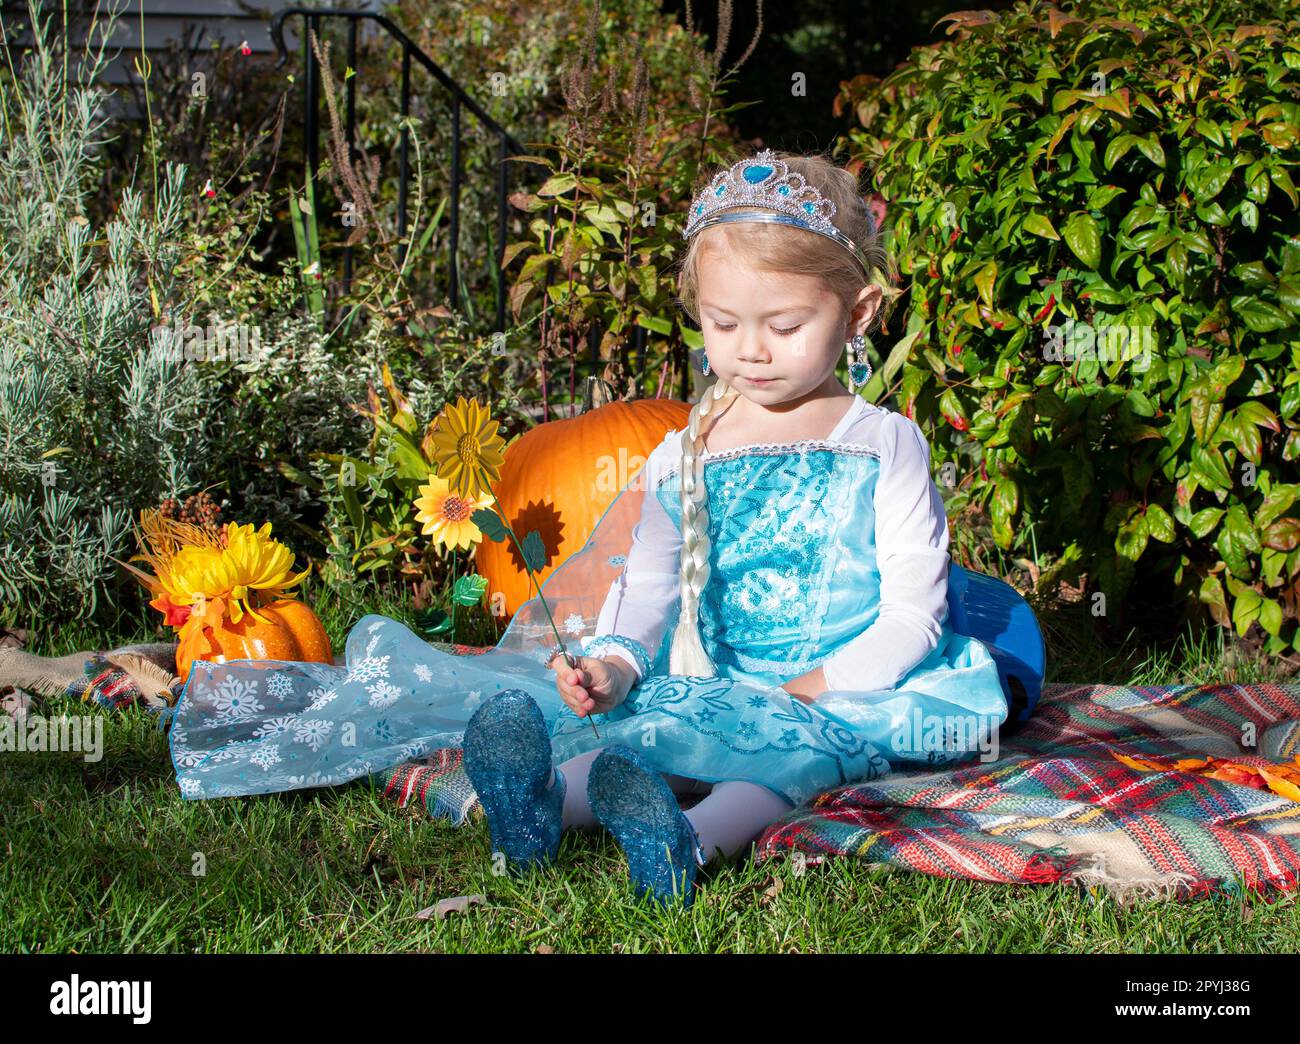 Cute caucasian toddler girl dressed up like a princess with tiara. toddler pretend play. Halloween costume kids Stock Photo